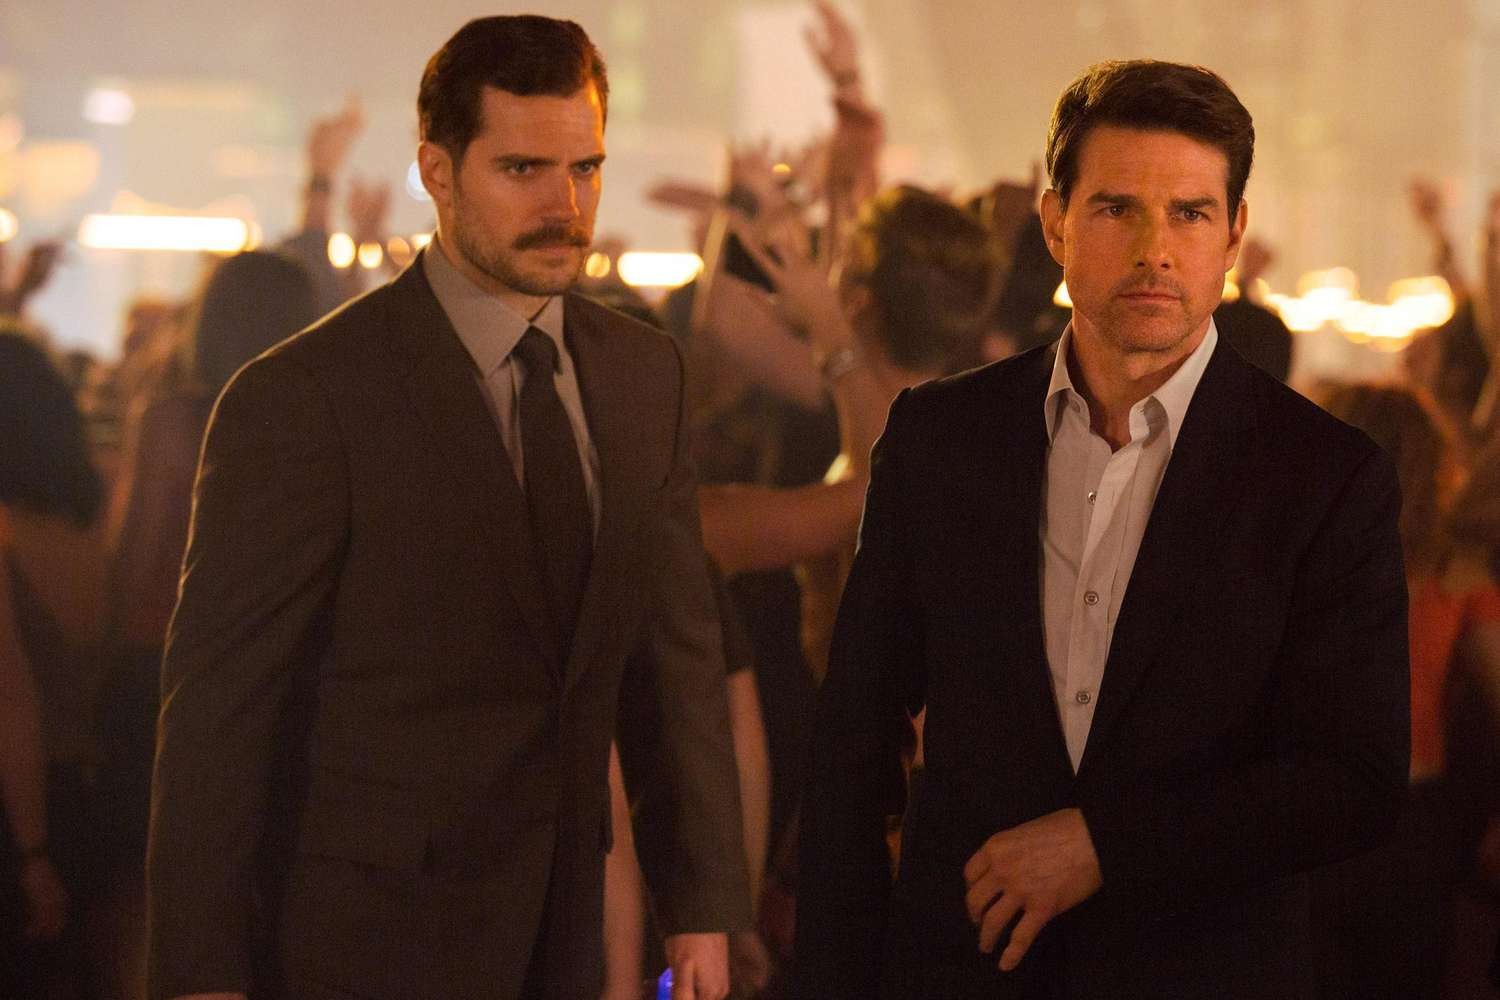 Henry Cavill and Tom Cruise in an action sequence in Mission: Impossible - Fallout